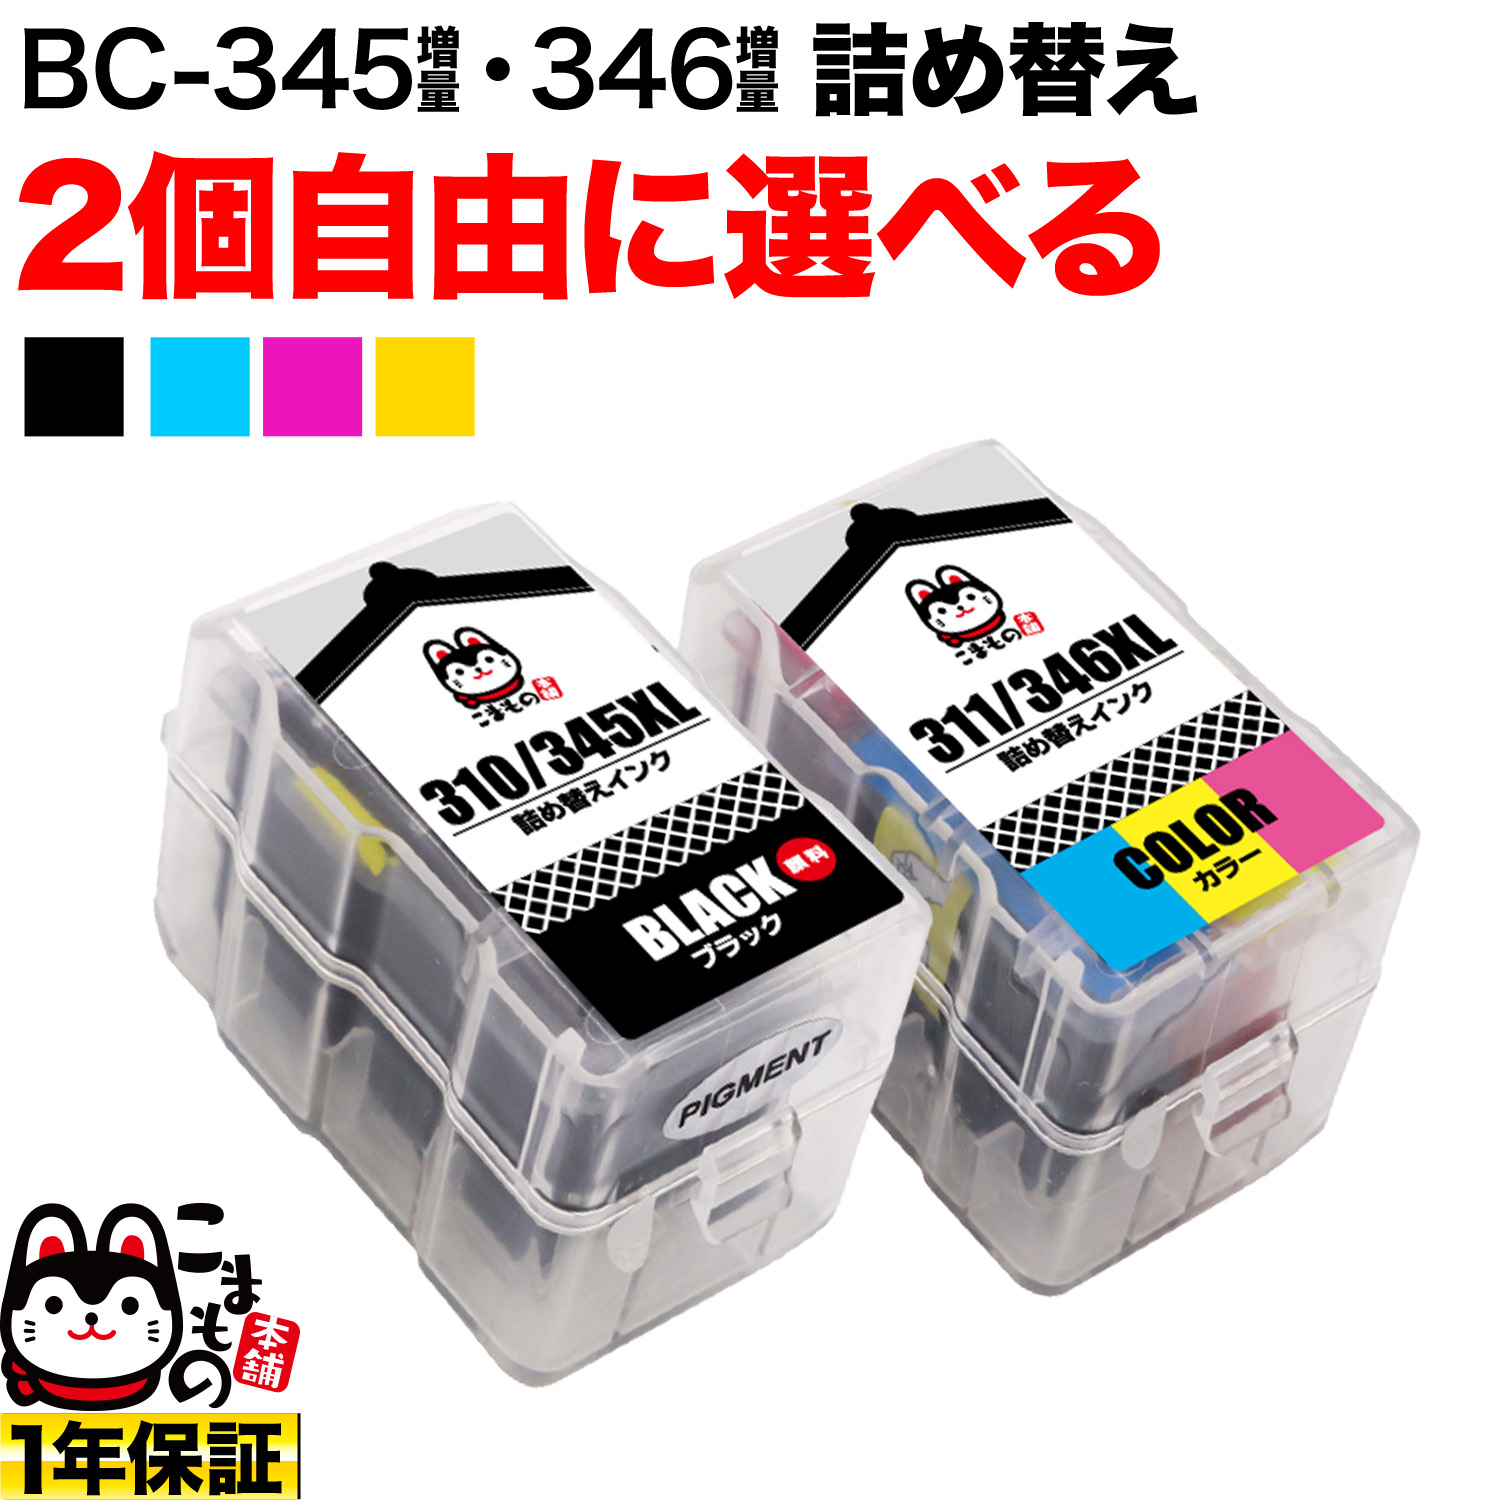 Canon BC-345XL BC-346XL 6箱セット　純正インクPC周辺機器